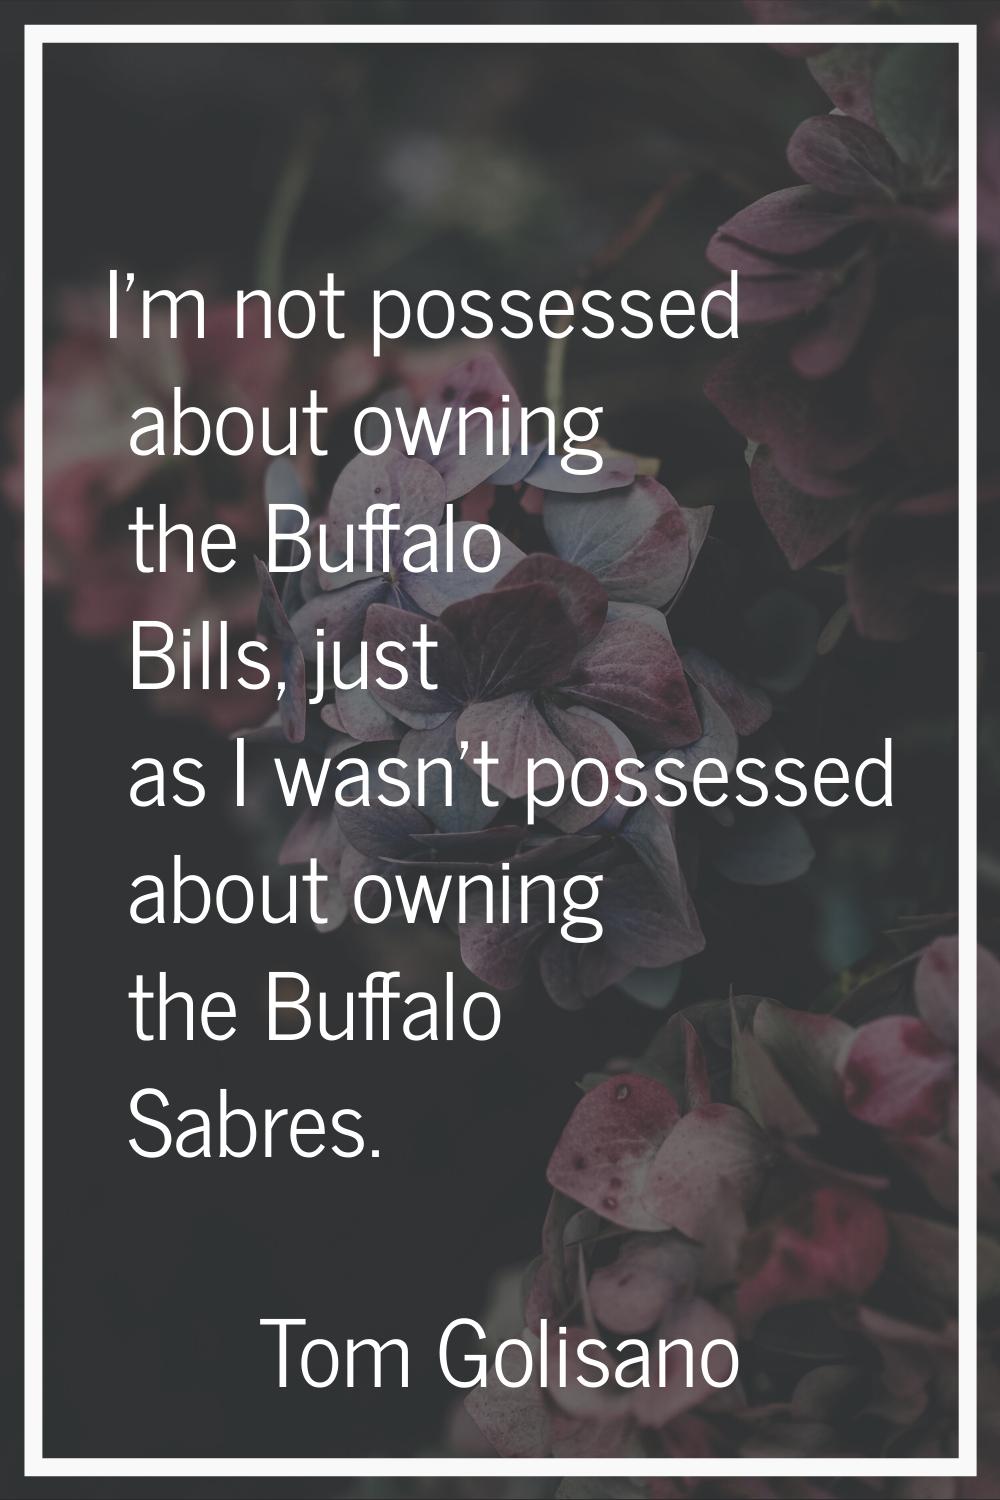 I'm not possessed about owning the Buffalo Bills, just as I wasn't possessed about owning the Buffa